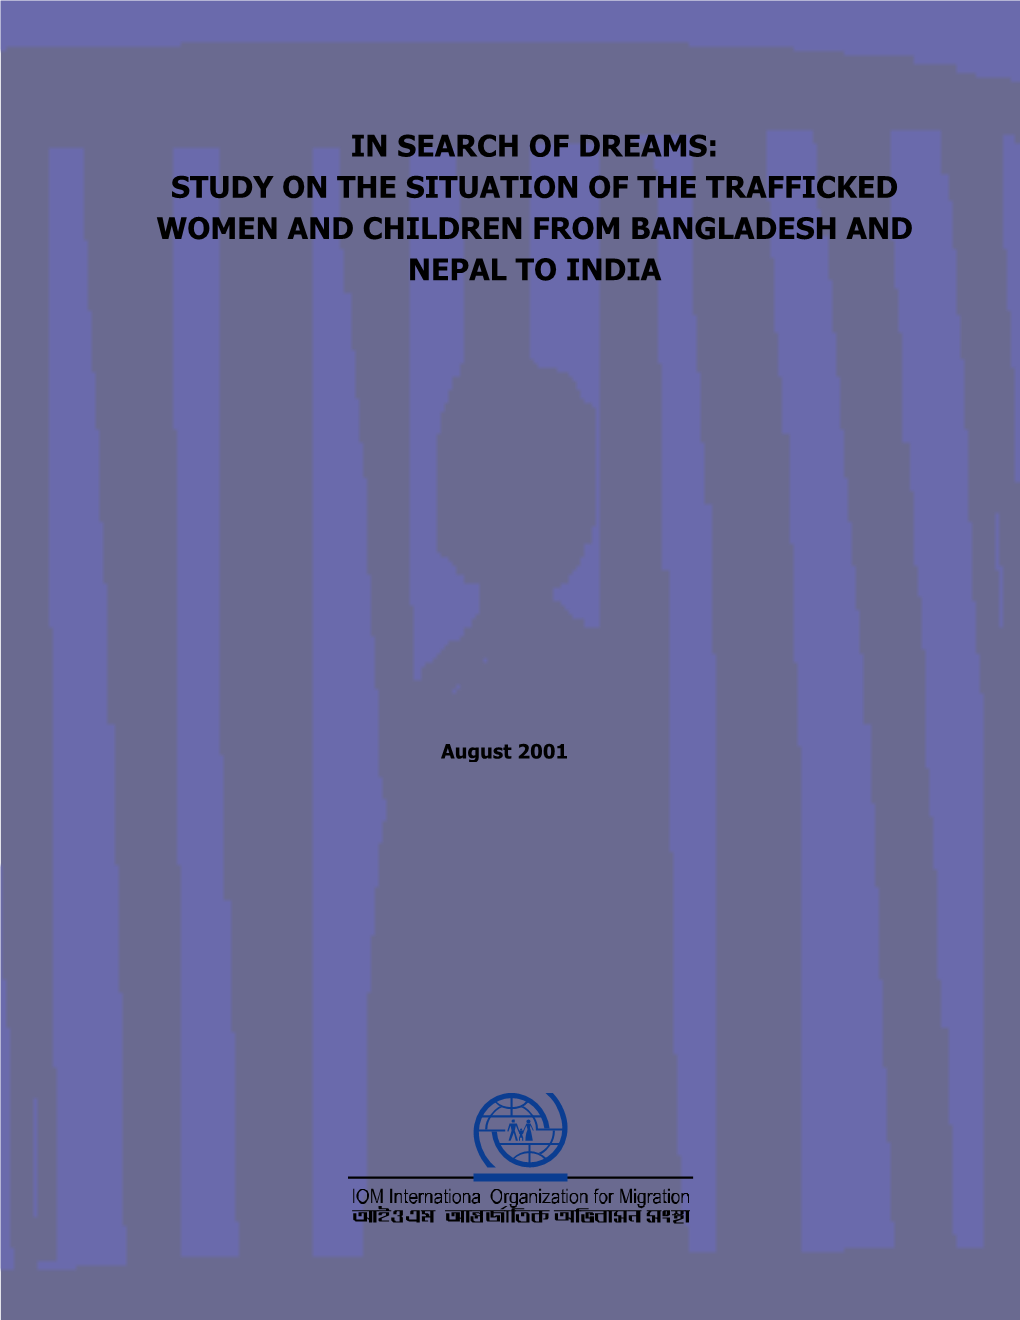 In Search of Dreams: Study on the Situation of the Trafficked Women and Children from Bangladesh and Nepal to India